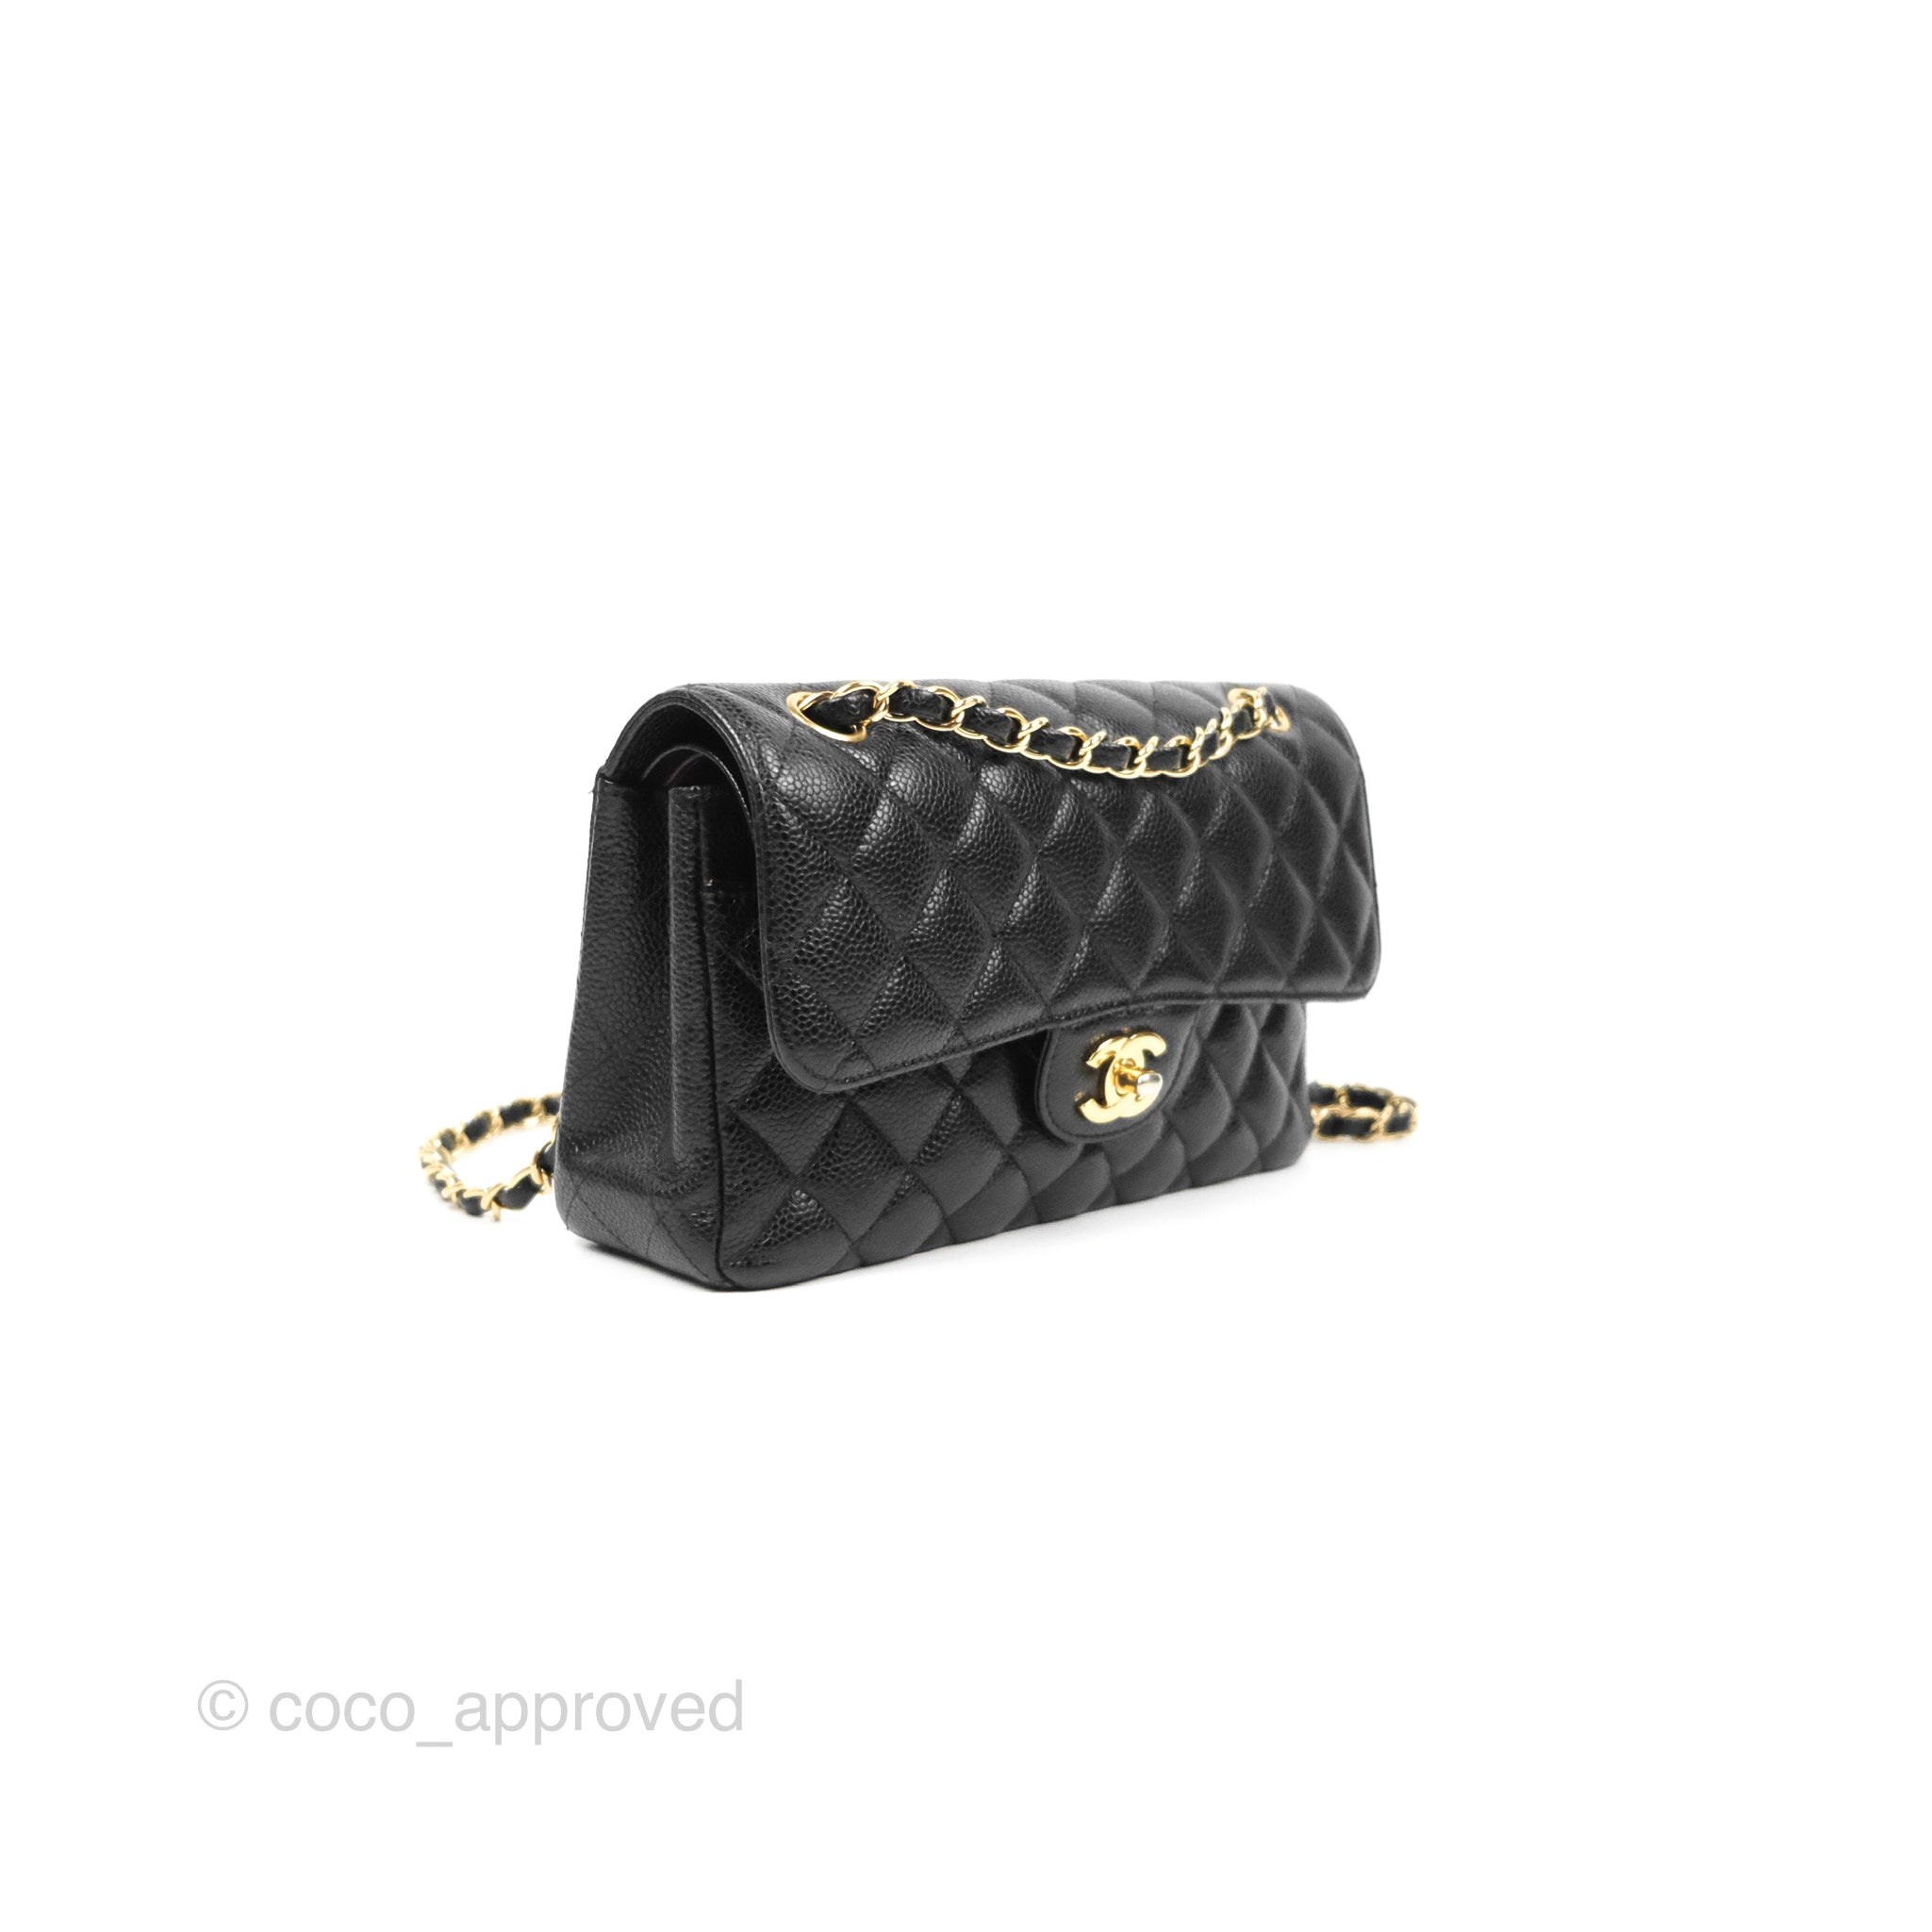 Chanel Classic Small Double Flap Black Caviar with gold hardware